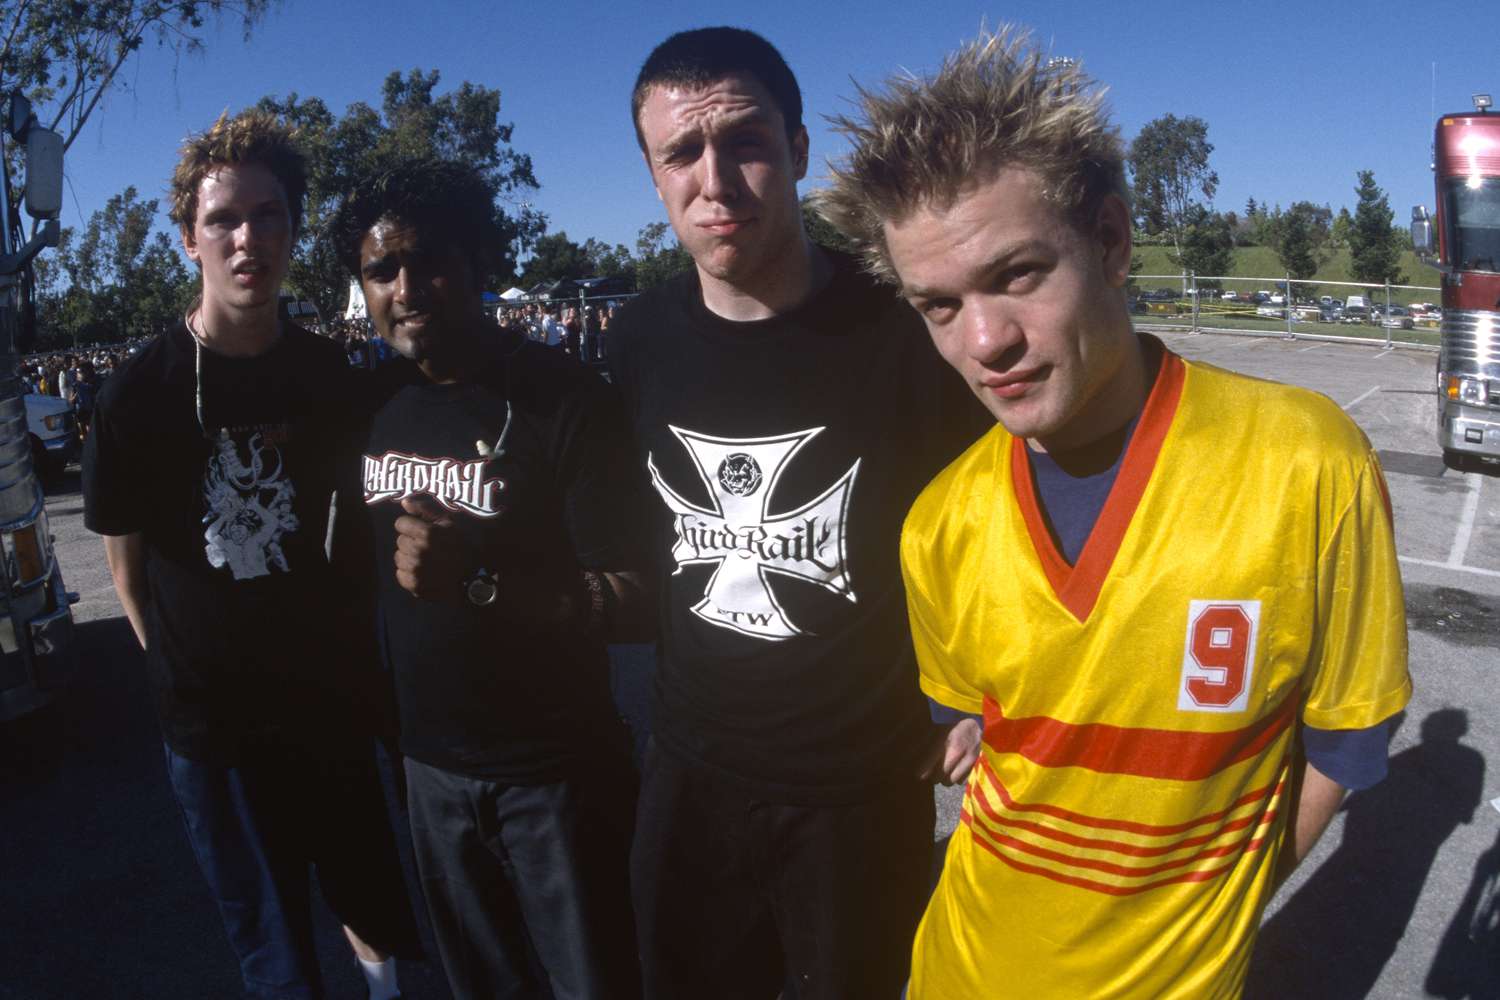 Deryck Whibley (R) and Sum 41 pose during Live 105's BFD at Shoreline Amphitheatre on June 15, 2001 in Mountain View, California.